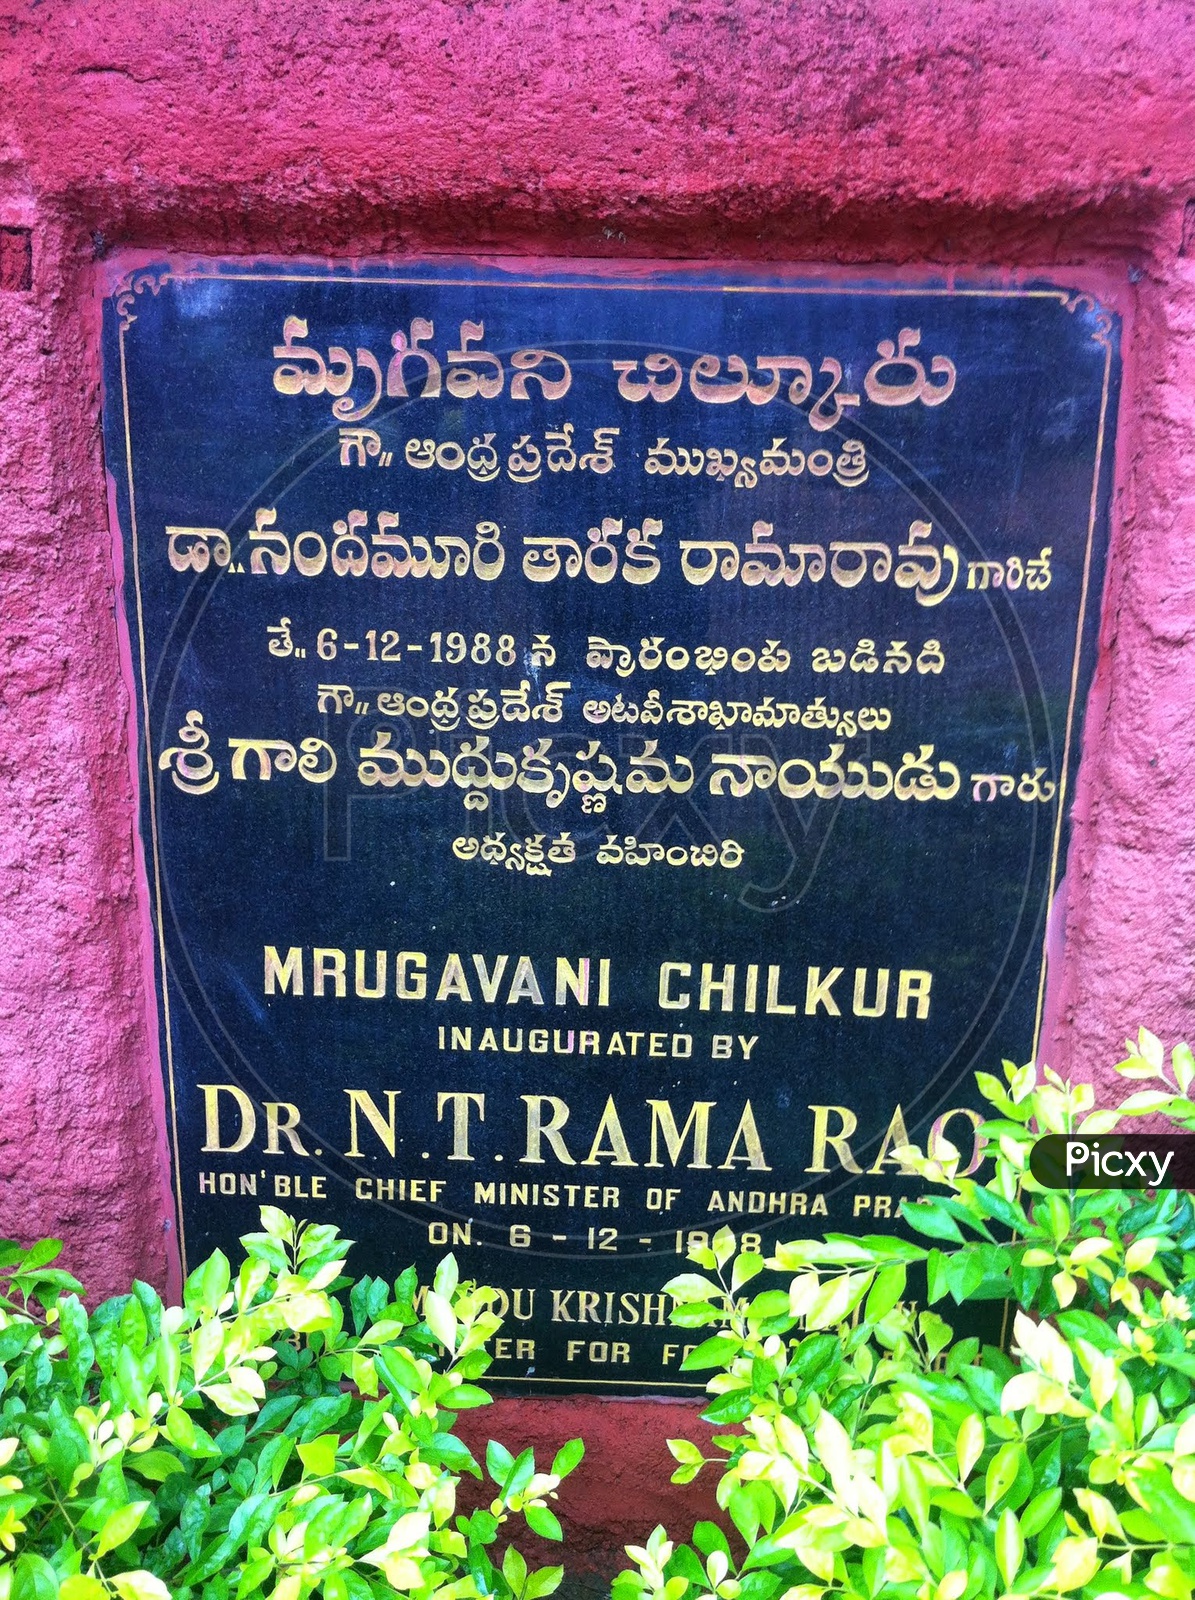 Foundation Stone  At Mrugavani National Park  Opened By Dr. N.T.Rama Rao